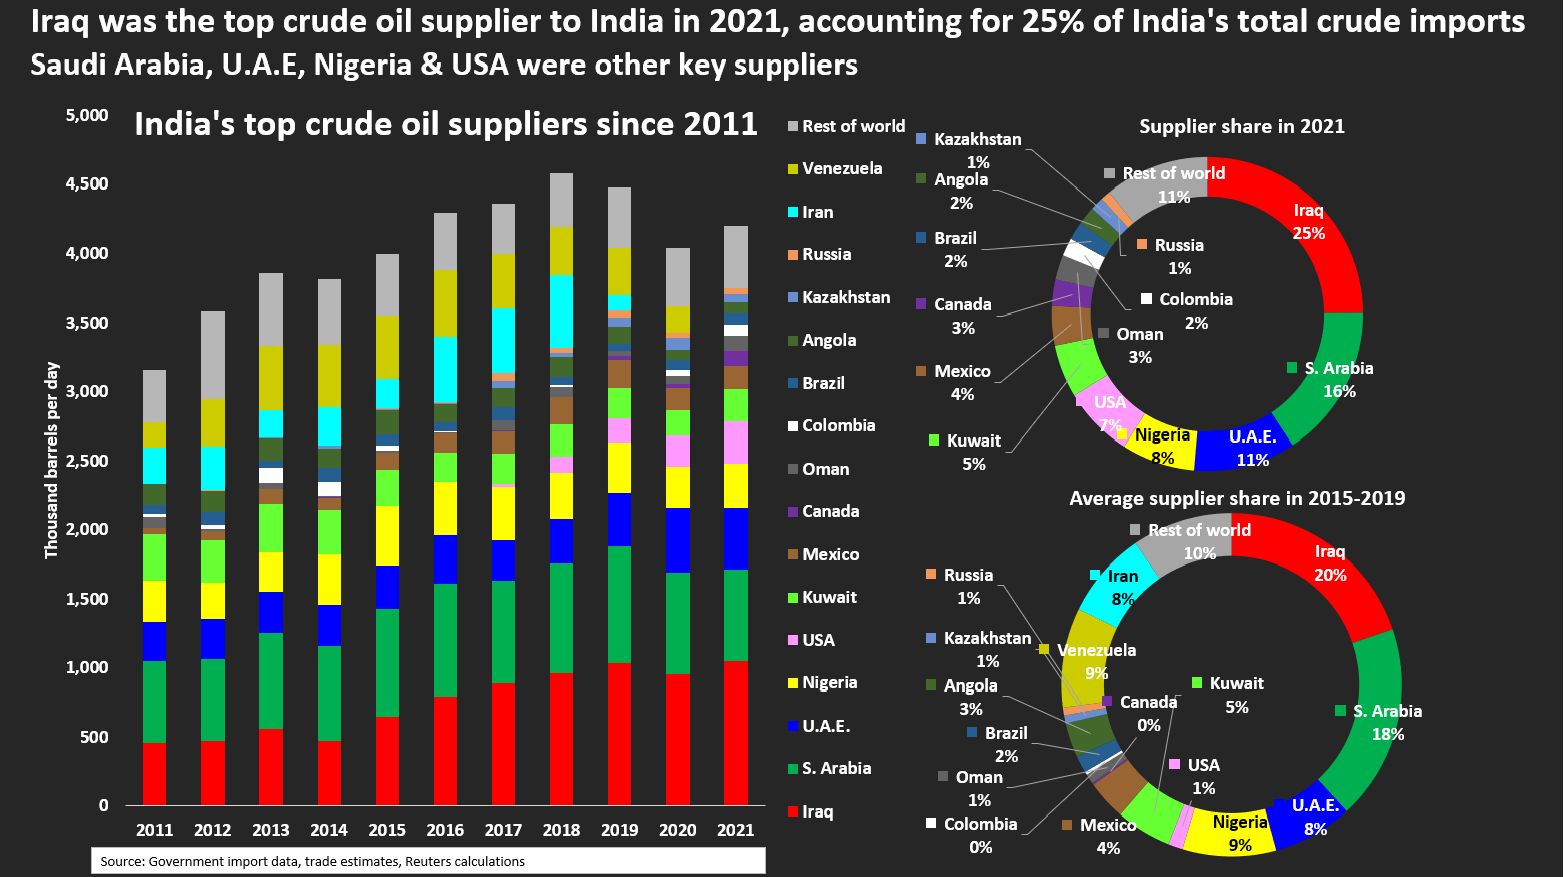 India's top crude oil suppliers since 2011